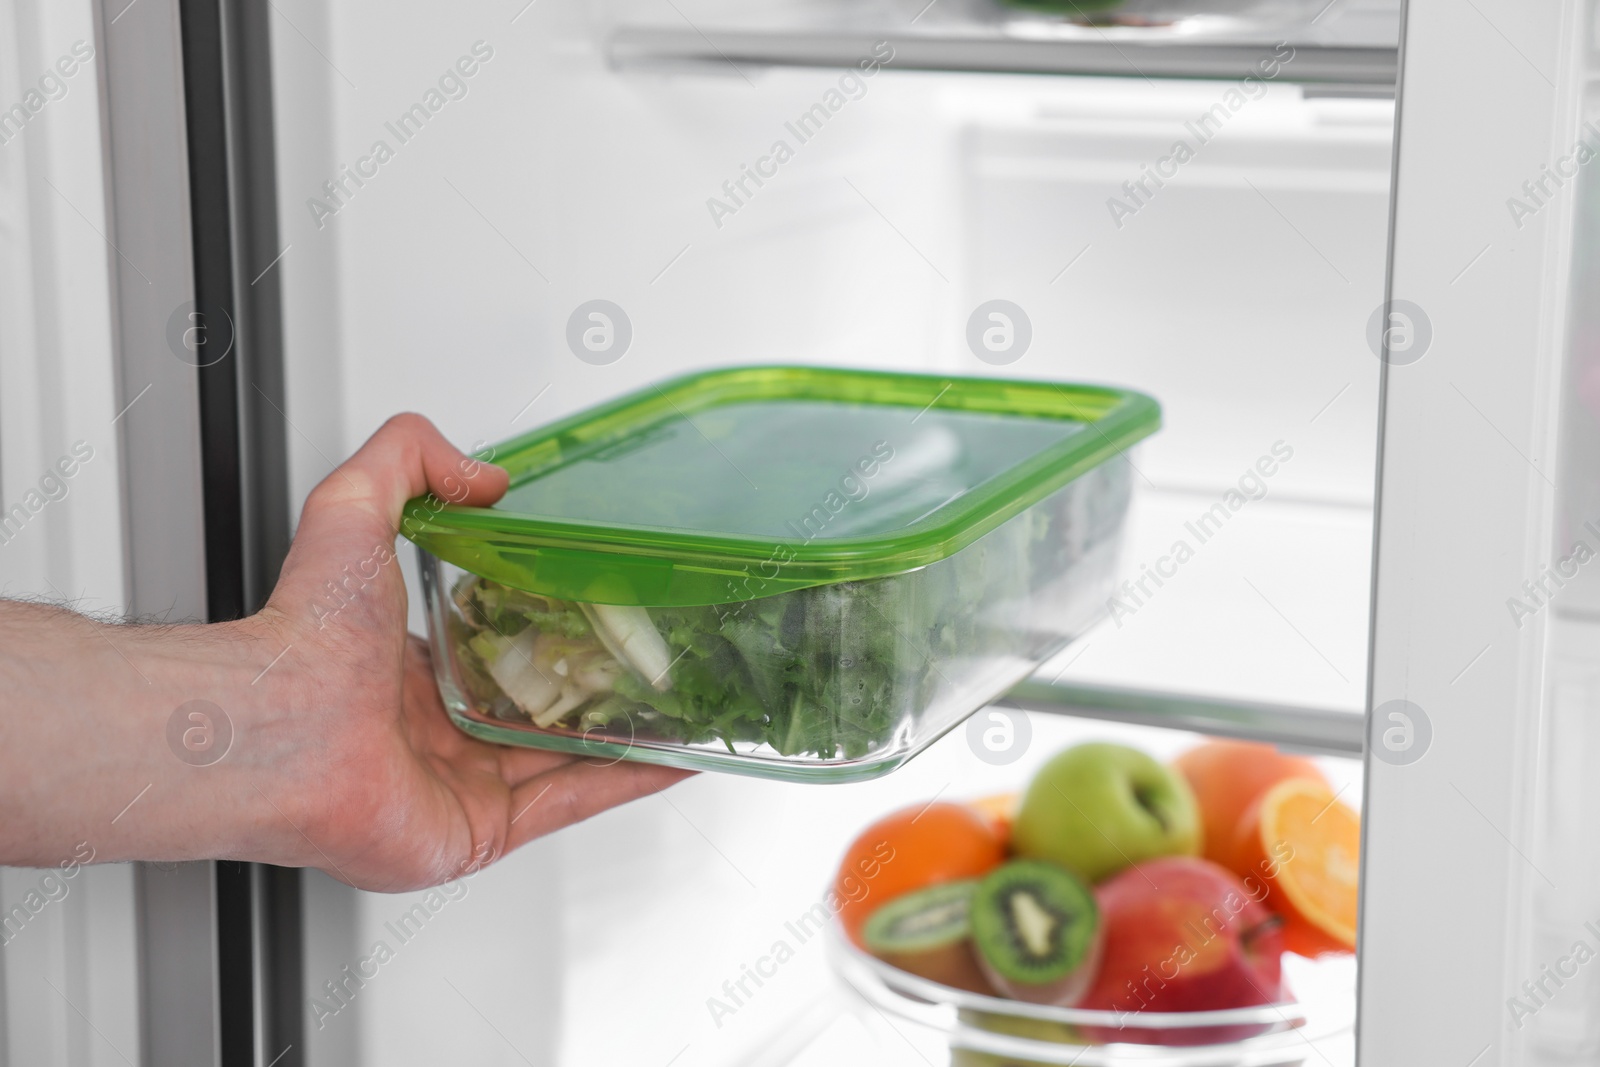 Photo of Man putting container with vegetables into refrigerator, closeup